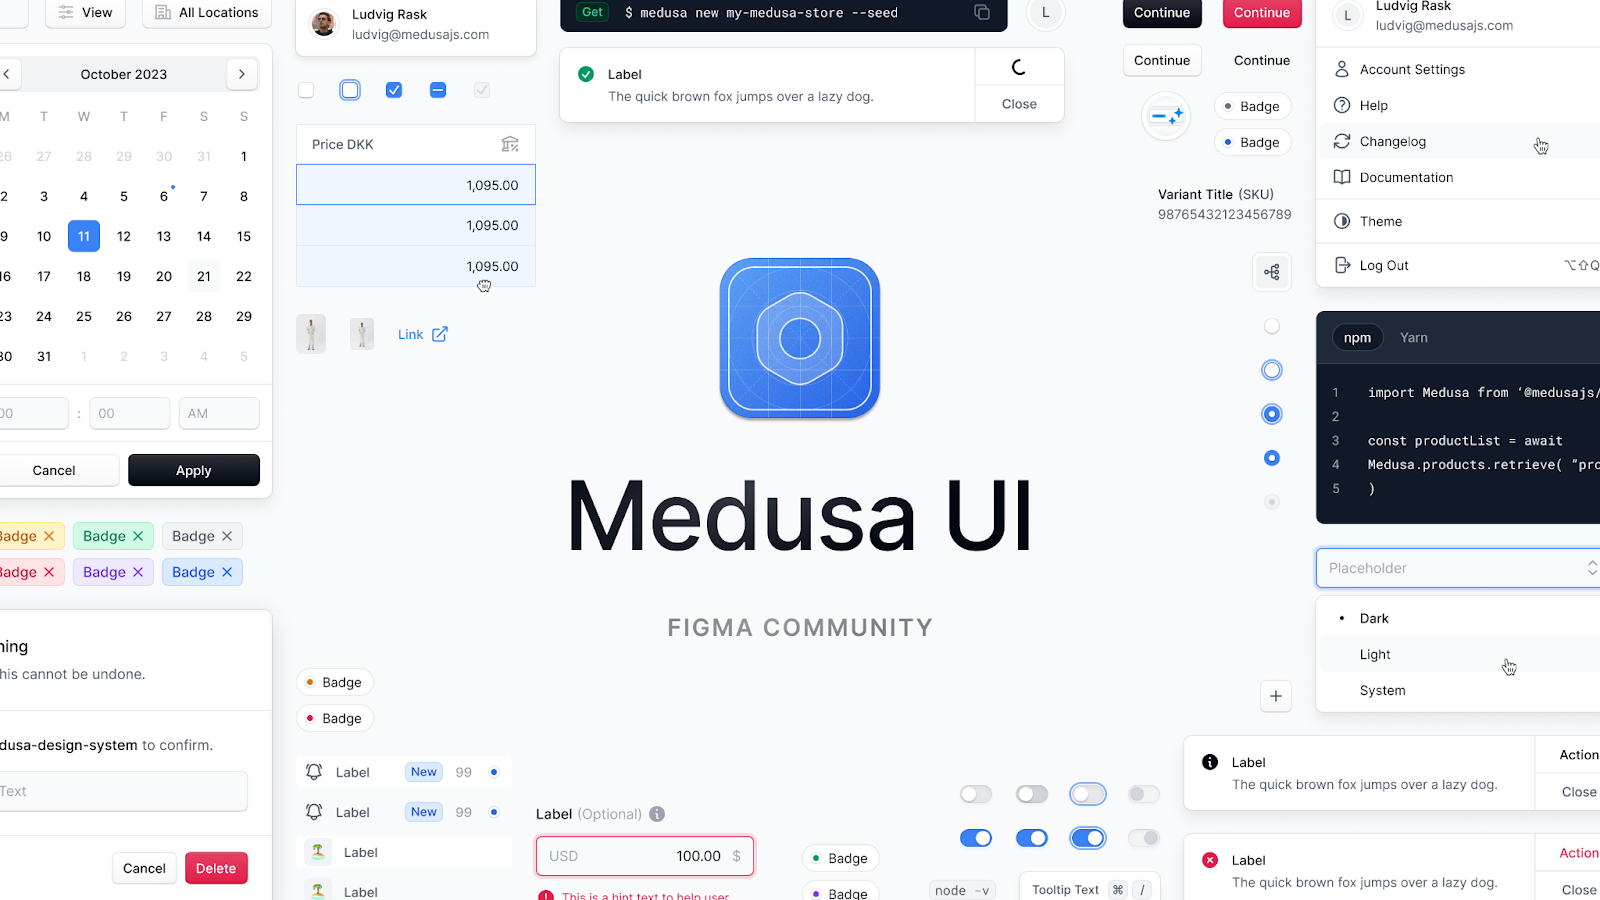 Medusa is designed for businesses that need a high degree of customization